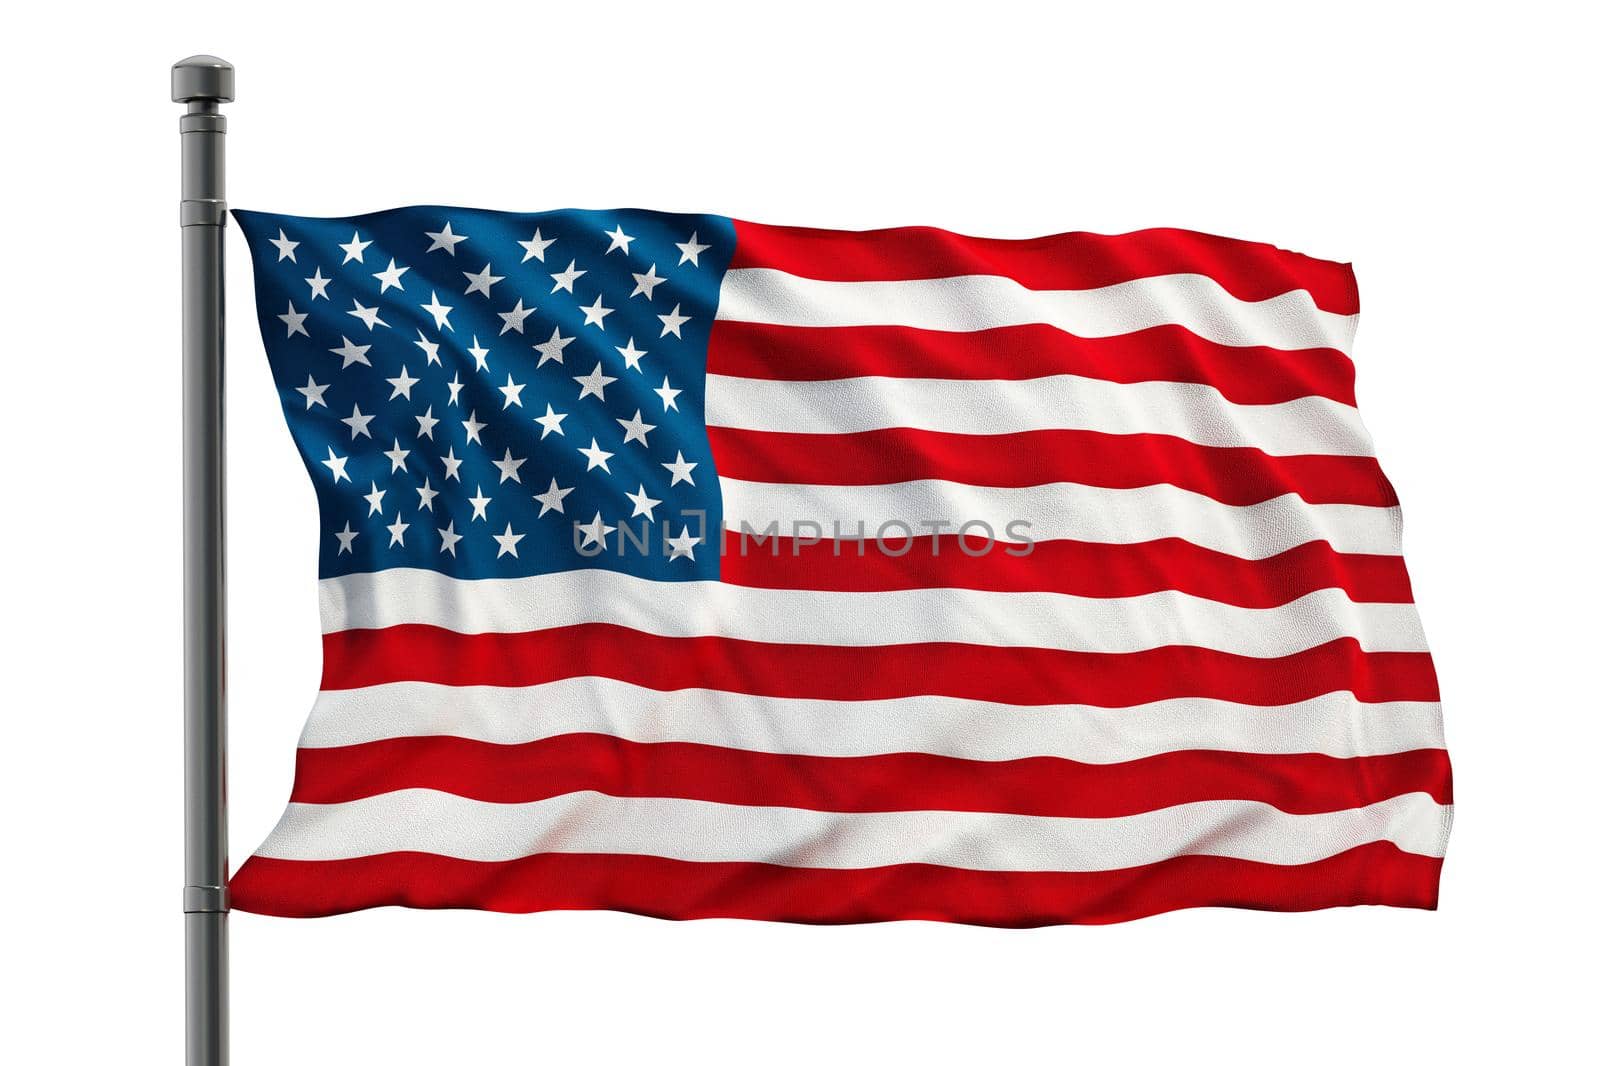 United States of America flag by Simsek